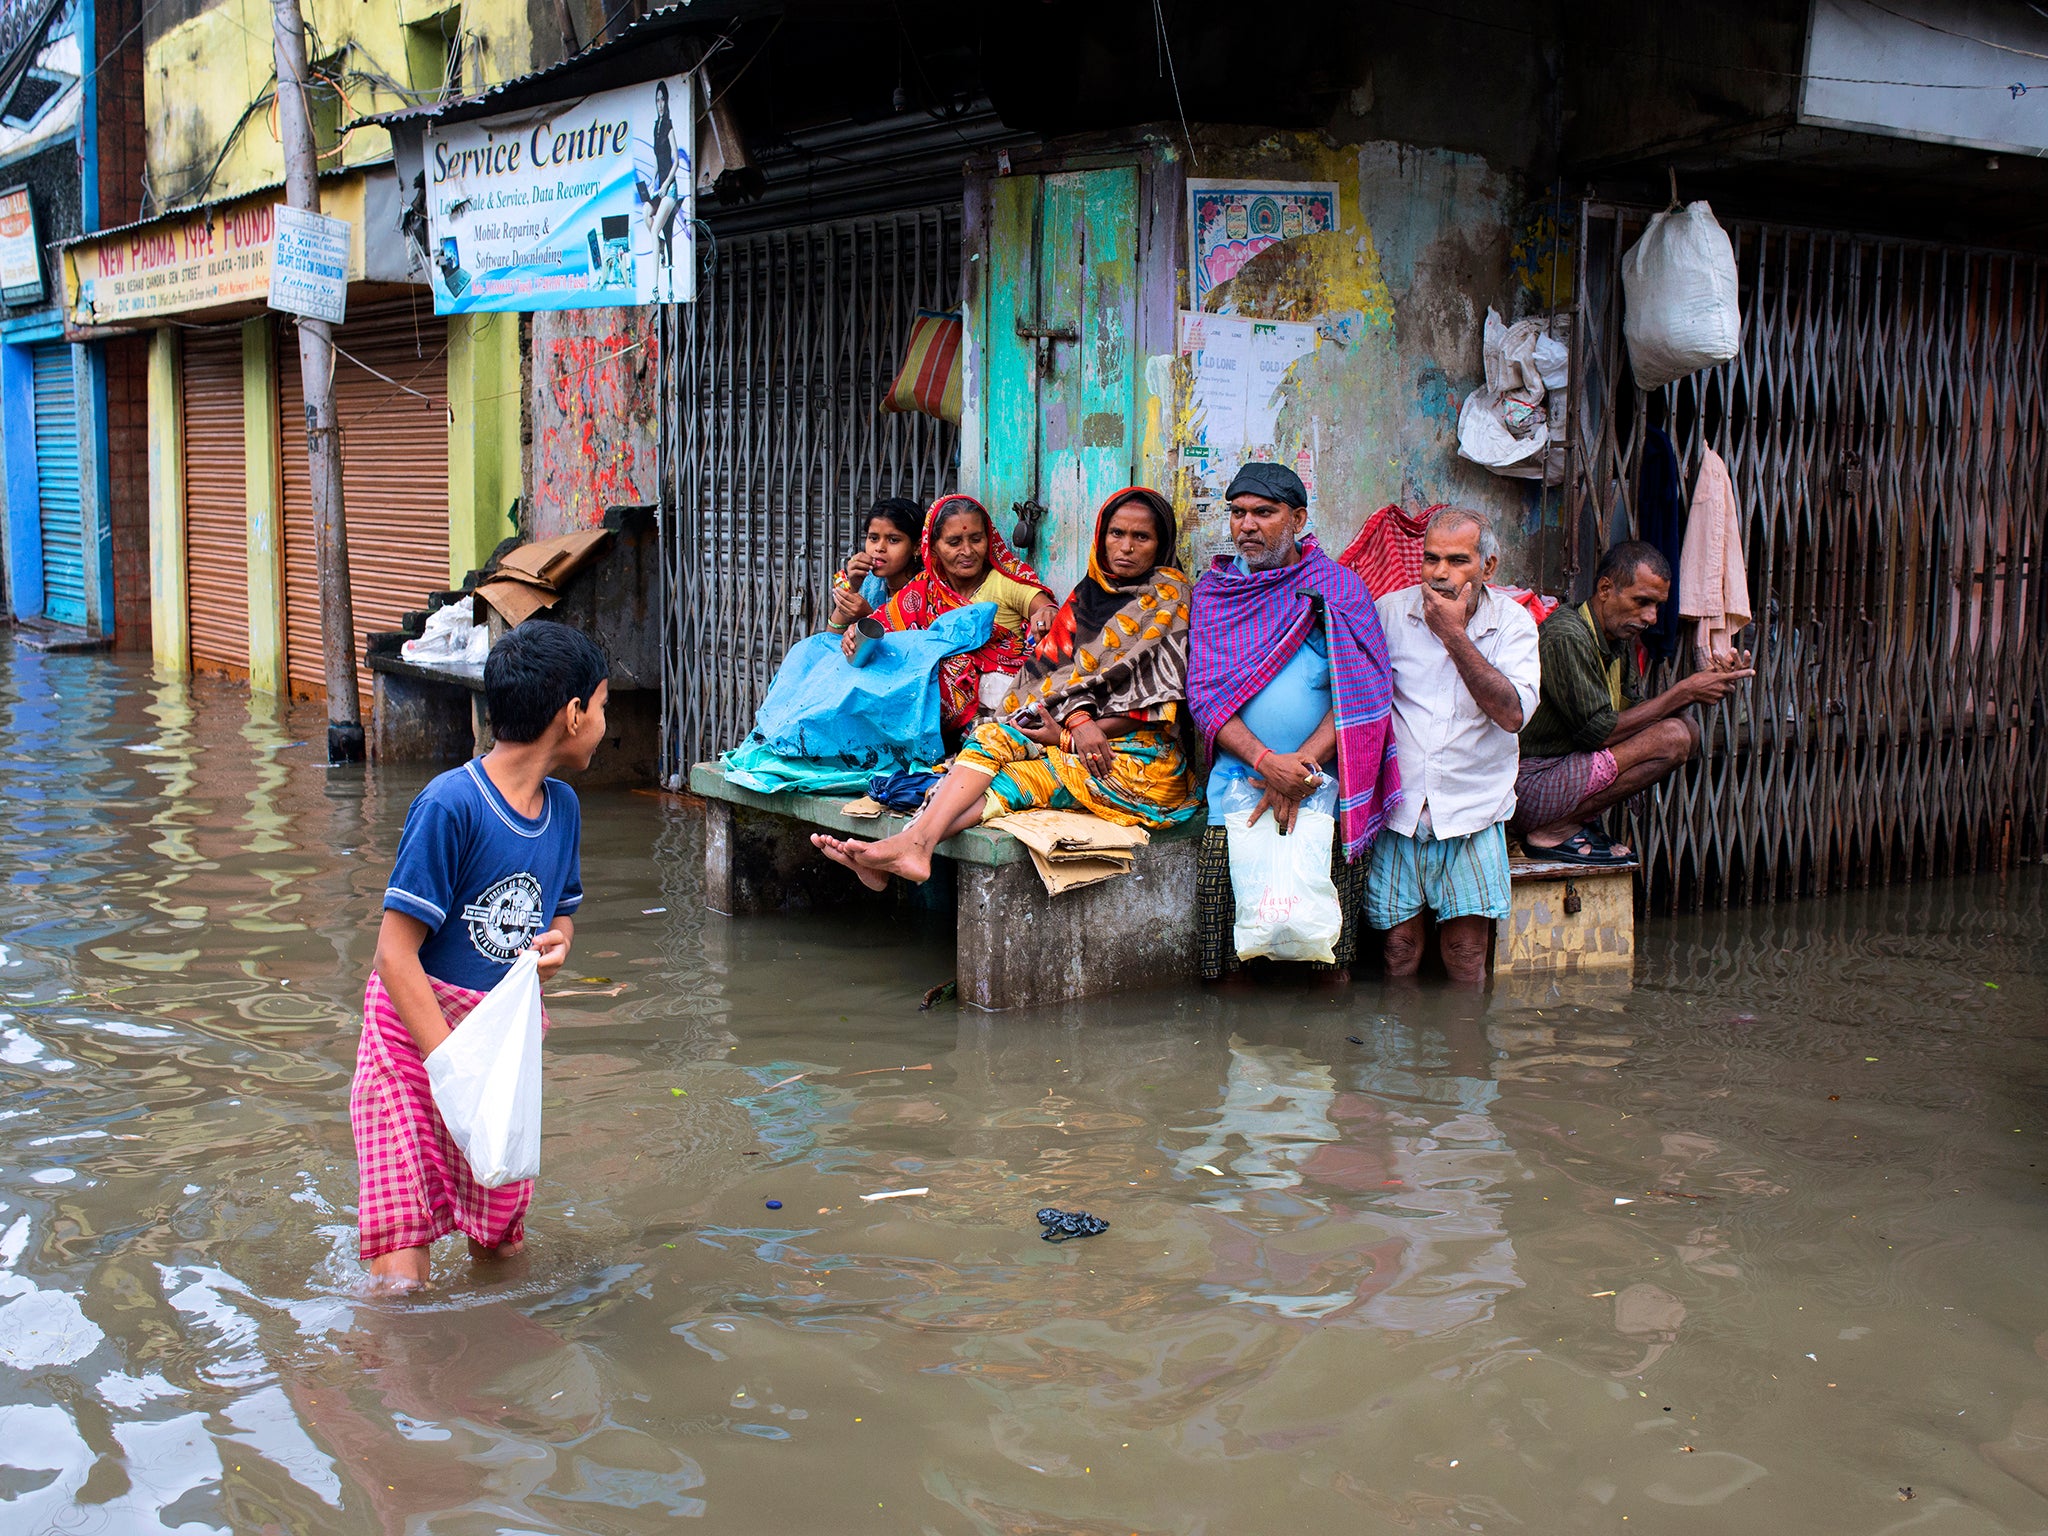 By 2070, Kolkata is projected to have more people exposed to coastal flooding than any city in the world